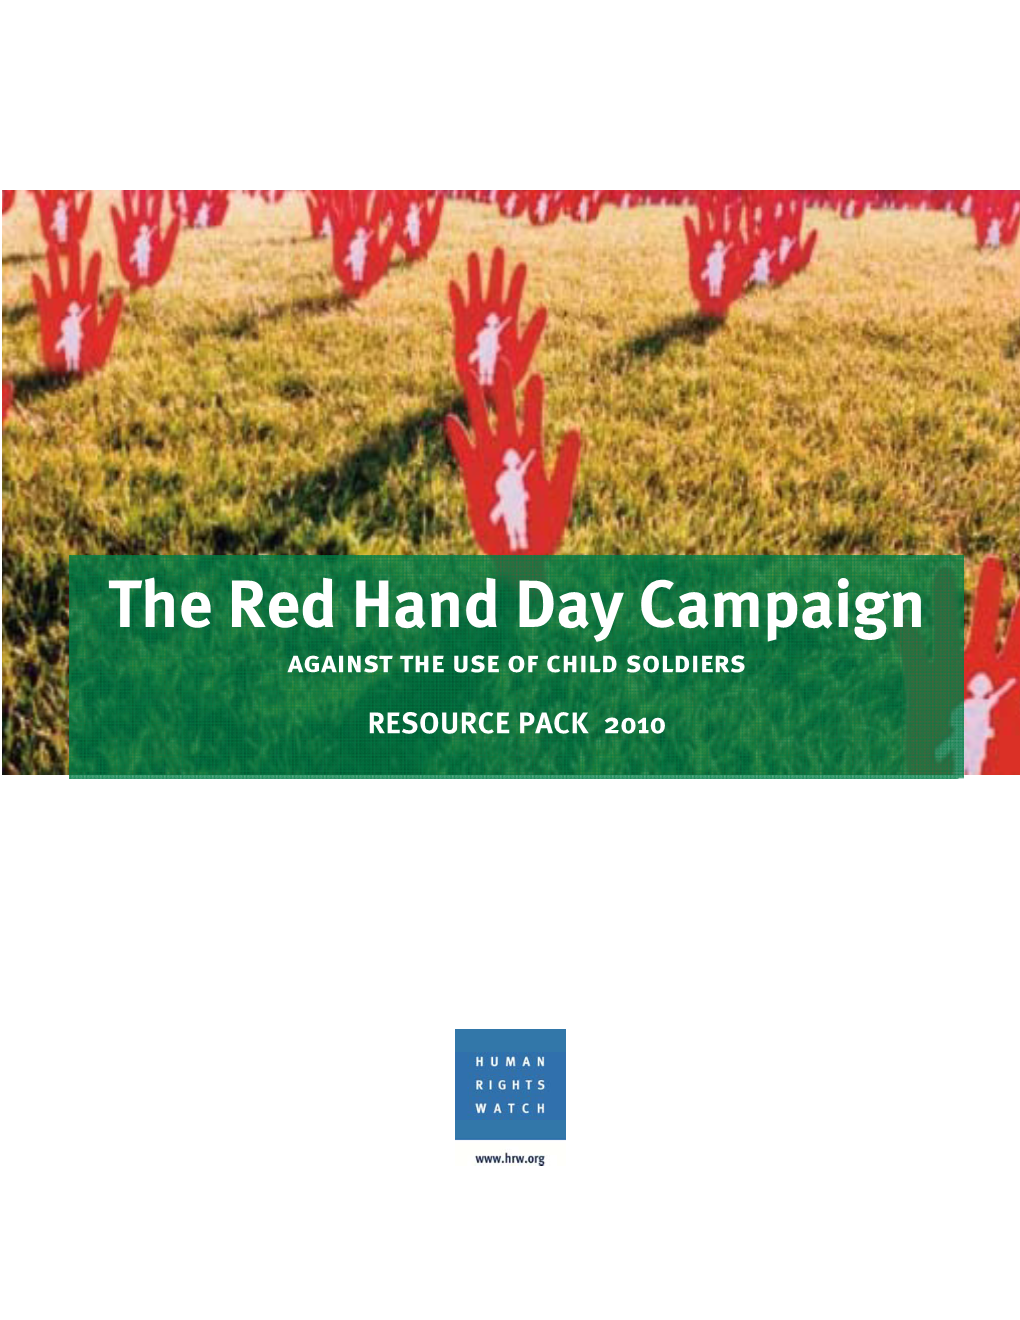 The Red Hand Day Campaign Against the Use of Child Soldiers